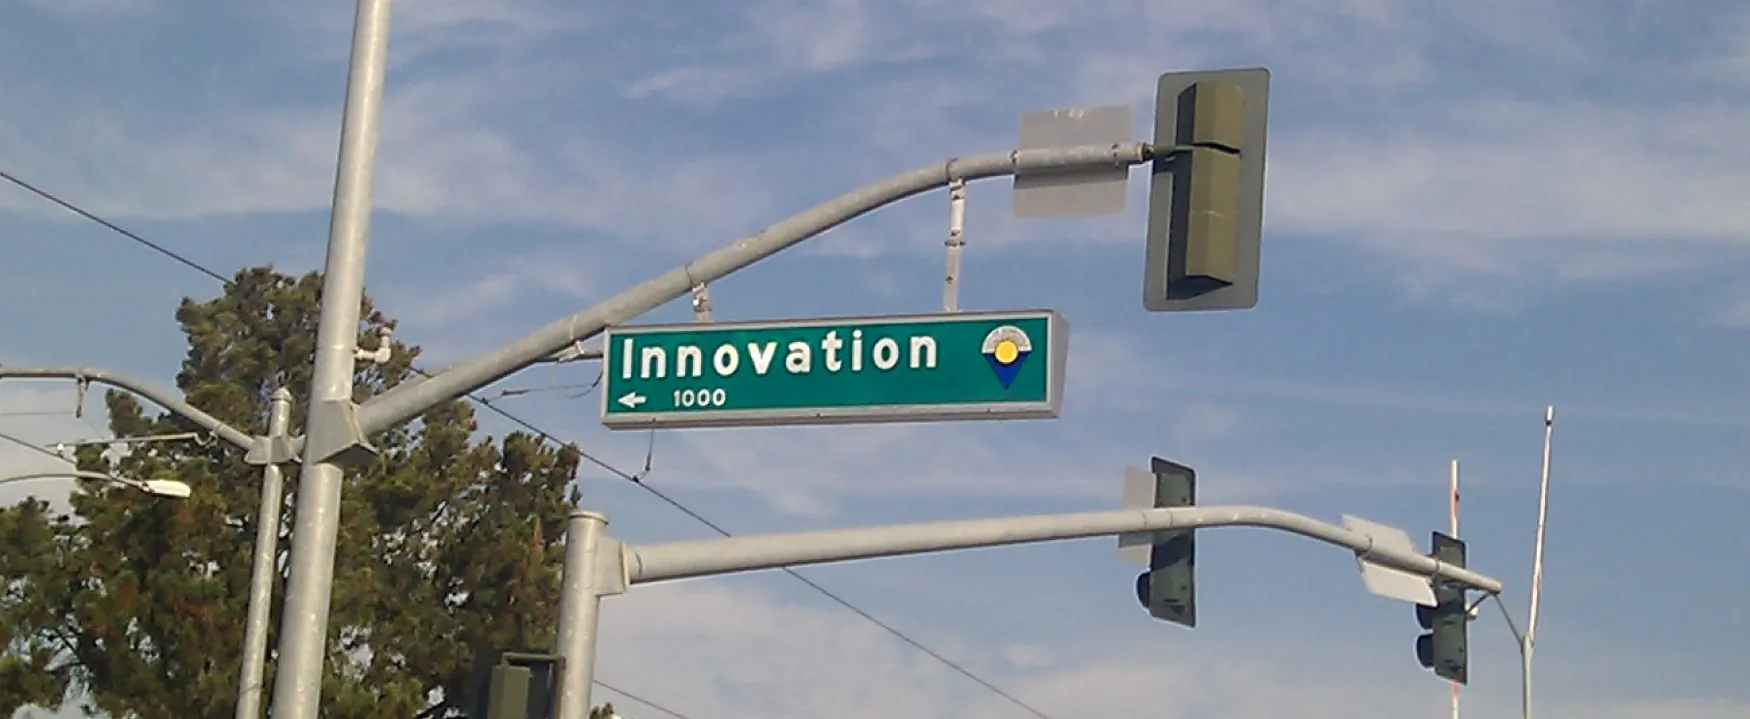 A photograph shows a street sign, and the street is named Innovation